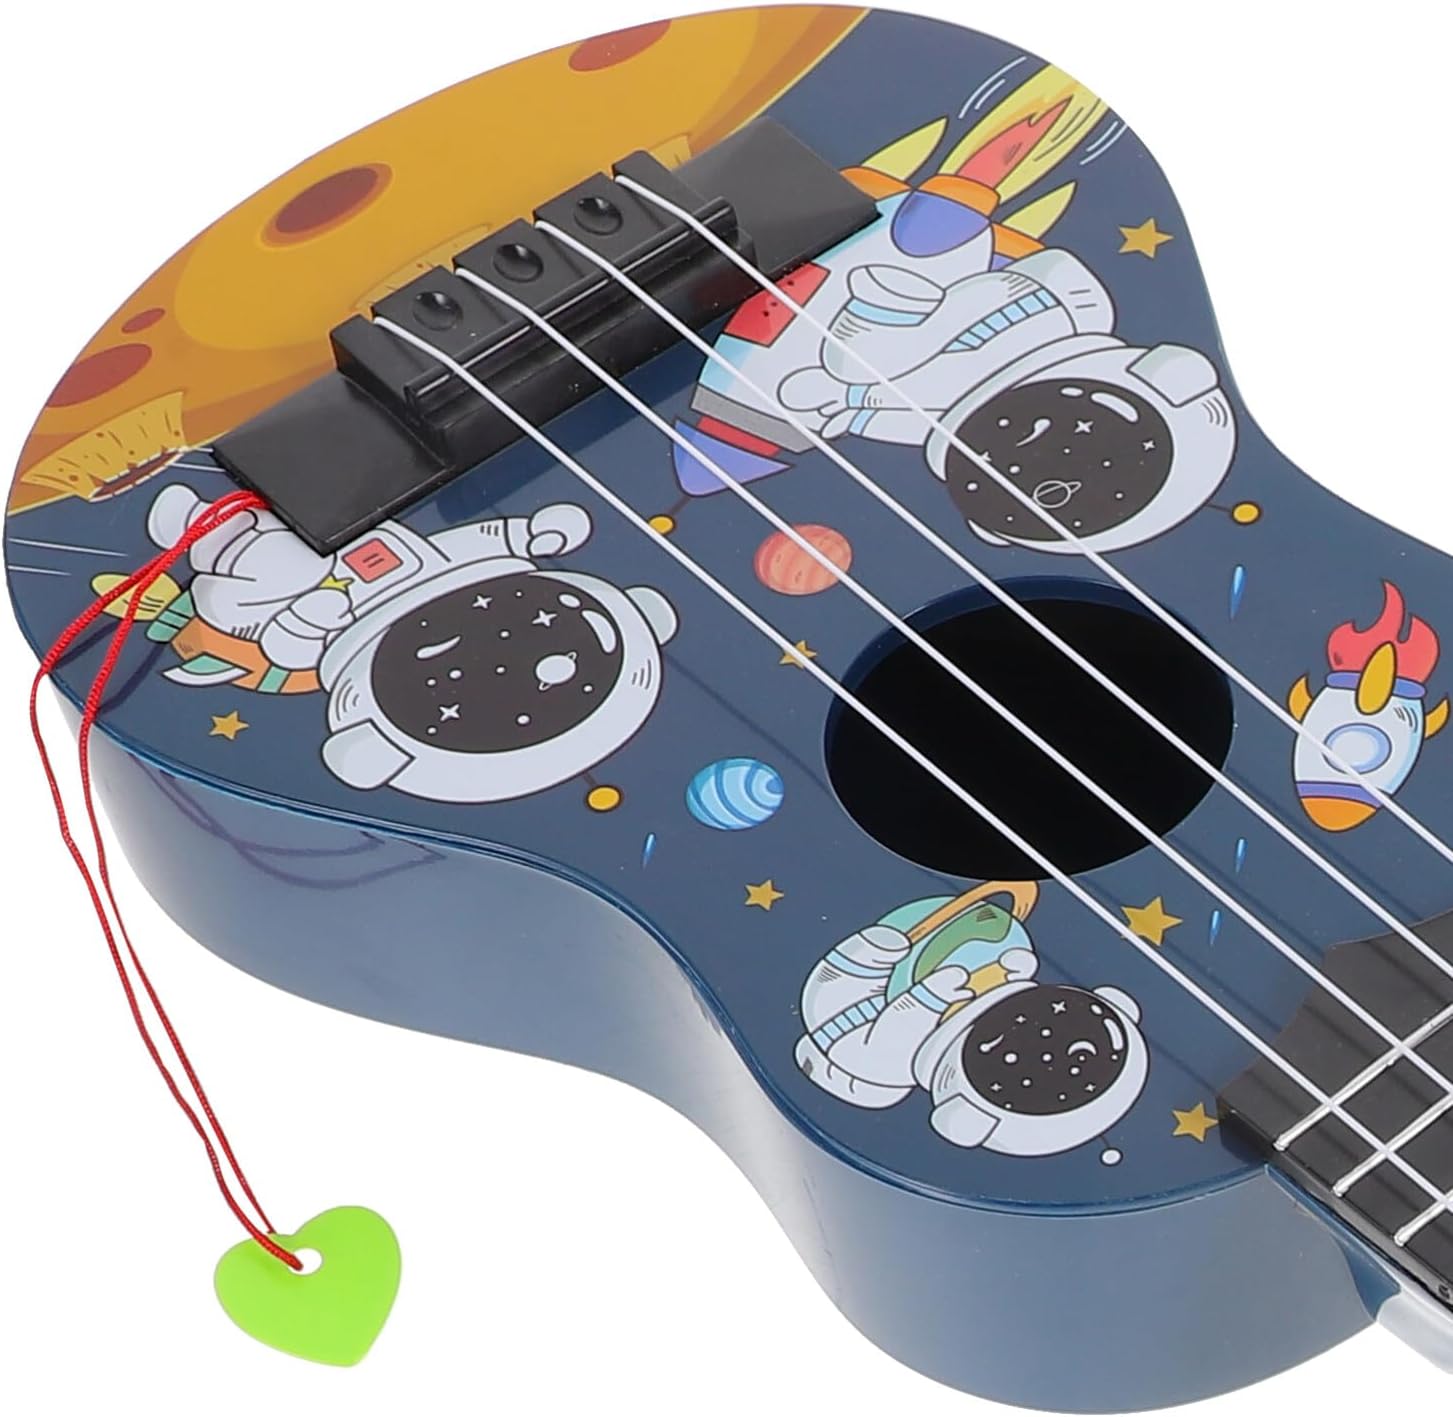 Alasum Kids Guitar Toy Space Themed Musical Instrument Toy Portable Small Ukulele Early Education Enlightenment Toy for Preschool Children Kids Beginners